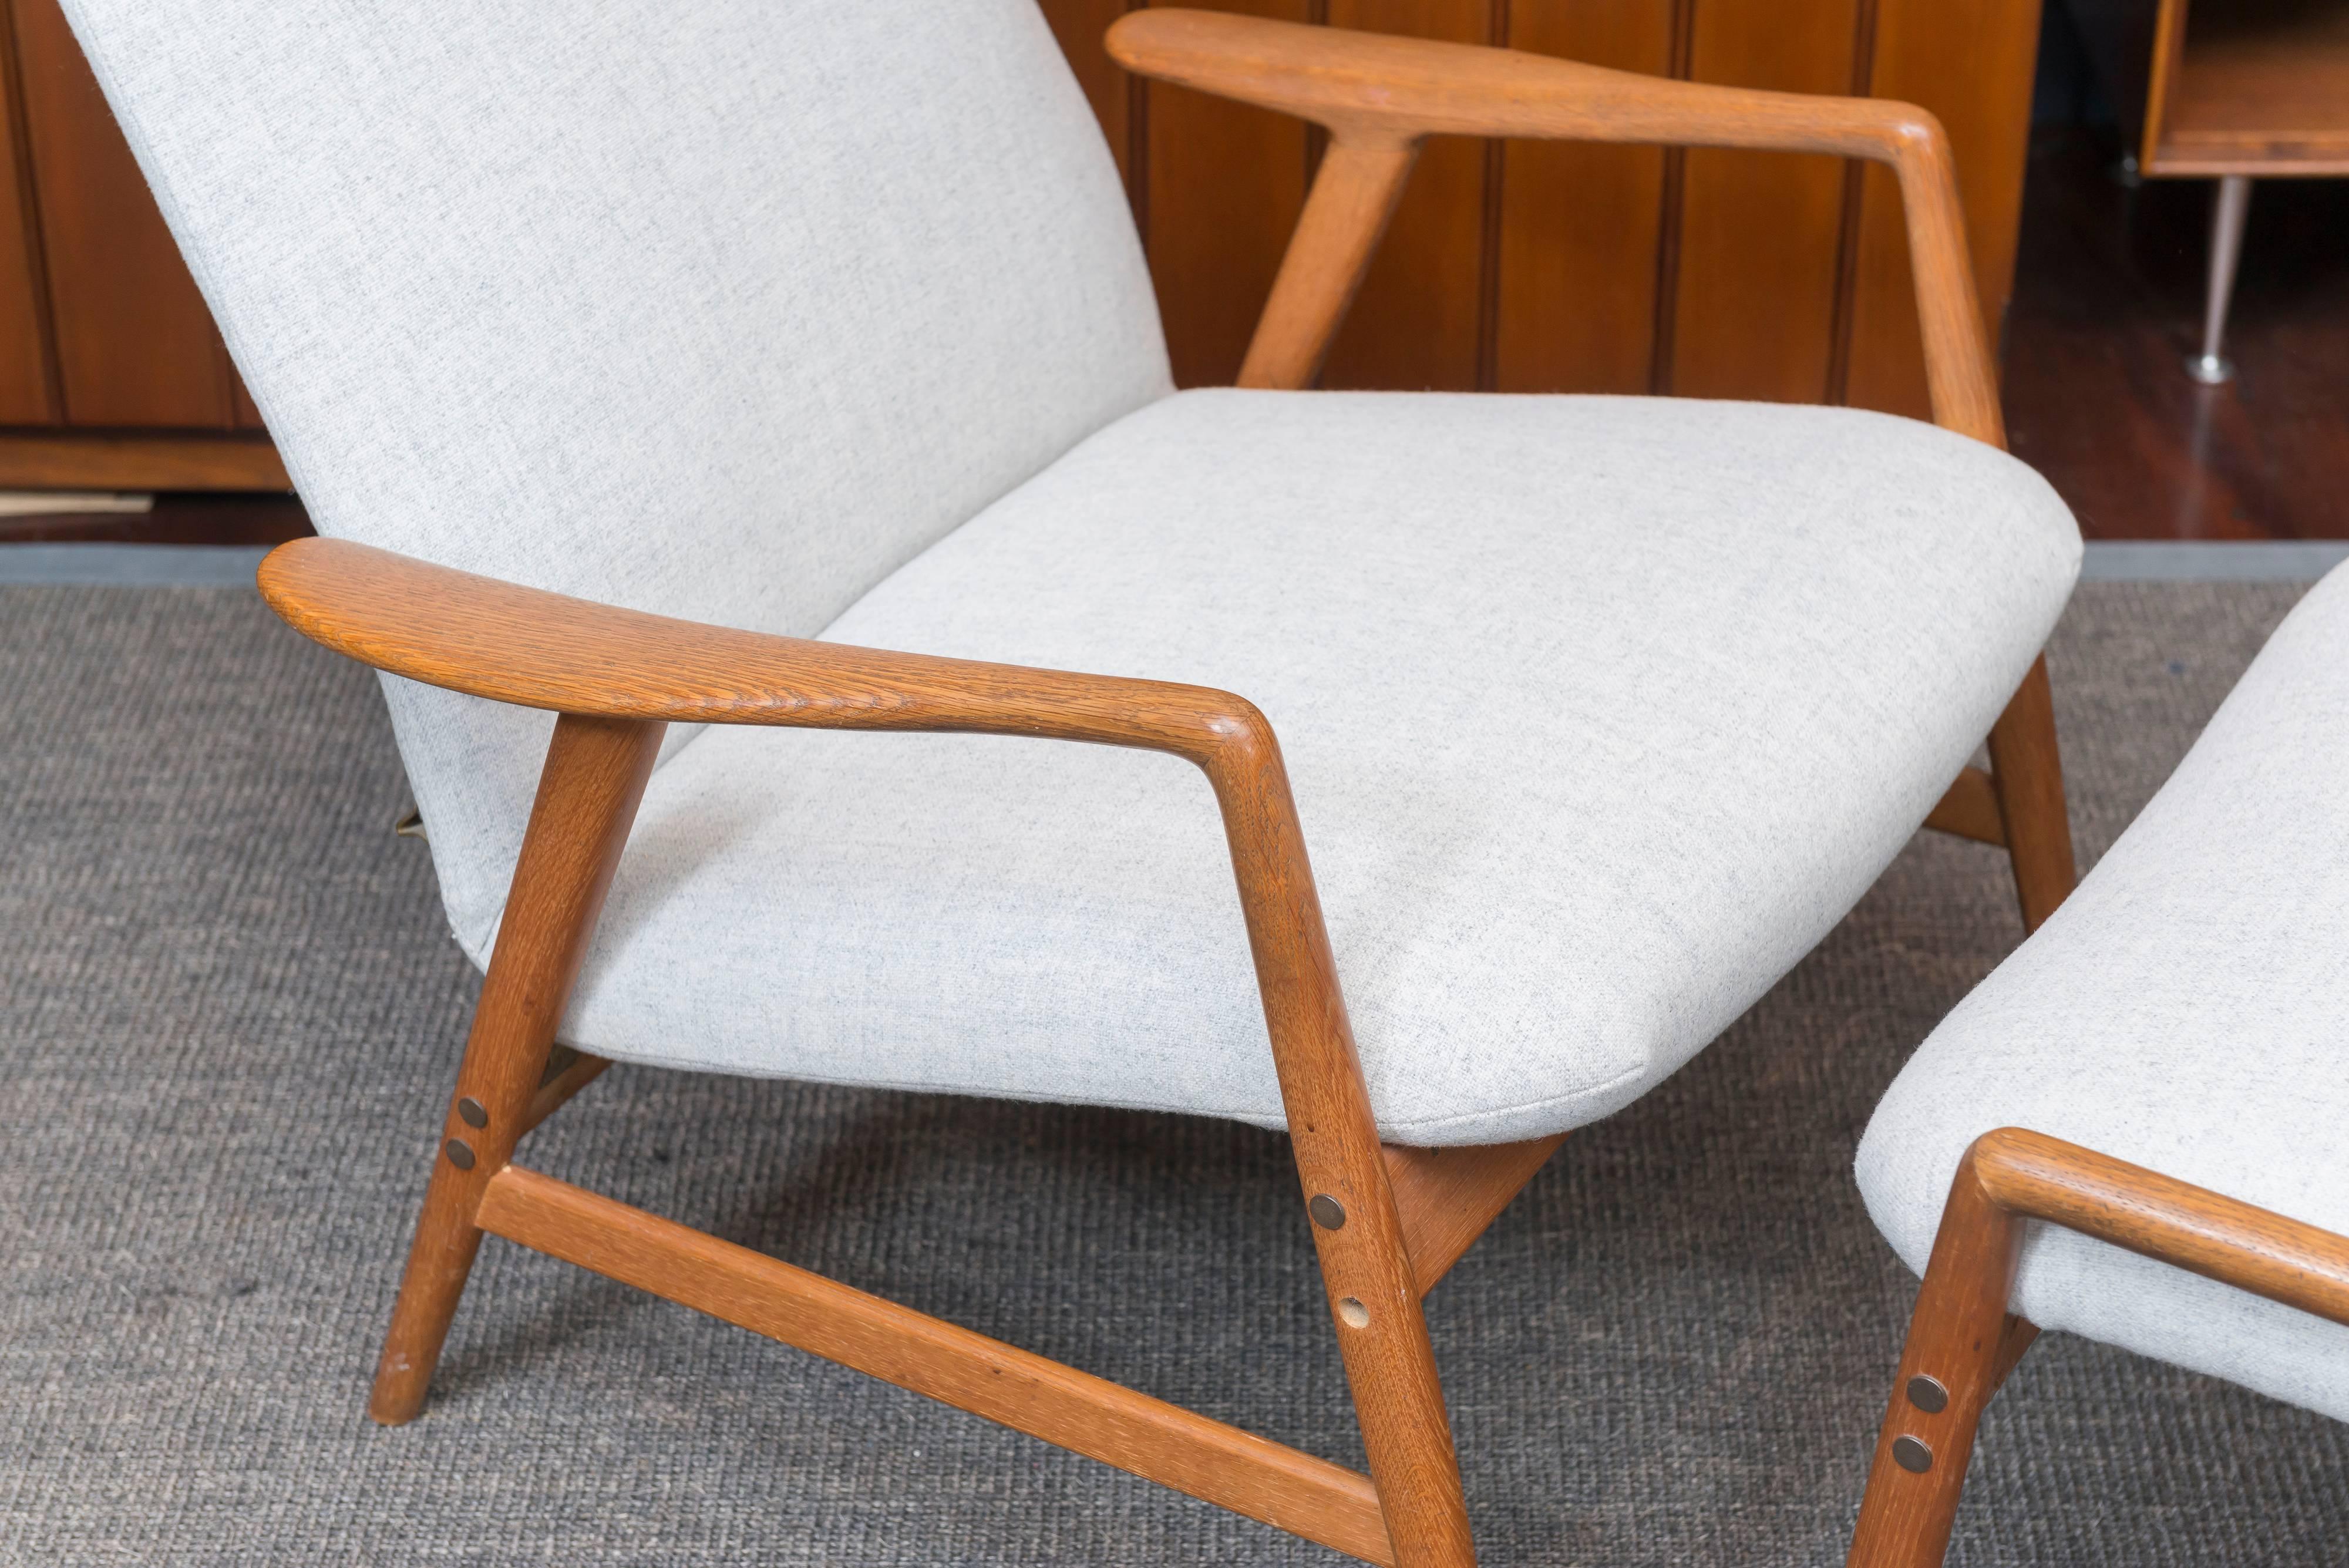 Alf Svensson design reclining lounge chair and matching ottoman for DUX furniture, Sweden. Newly upholstered in Danish wool with oakwood frames in excellent original condition.